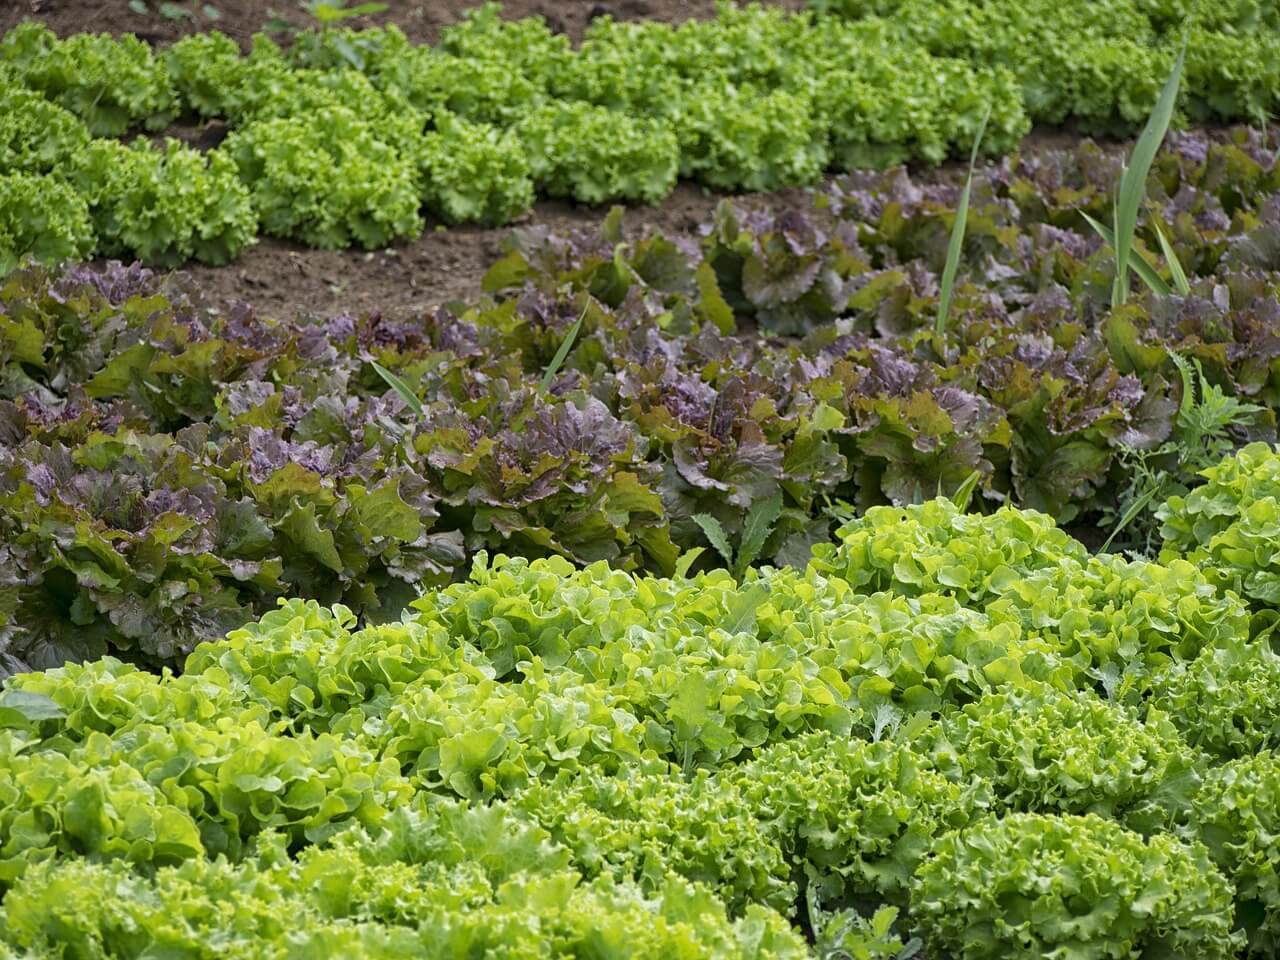 A variety of lettuce growing in rows on the ground.